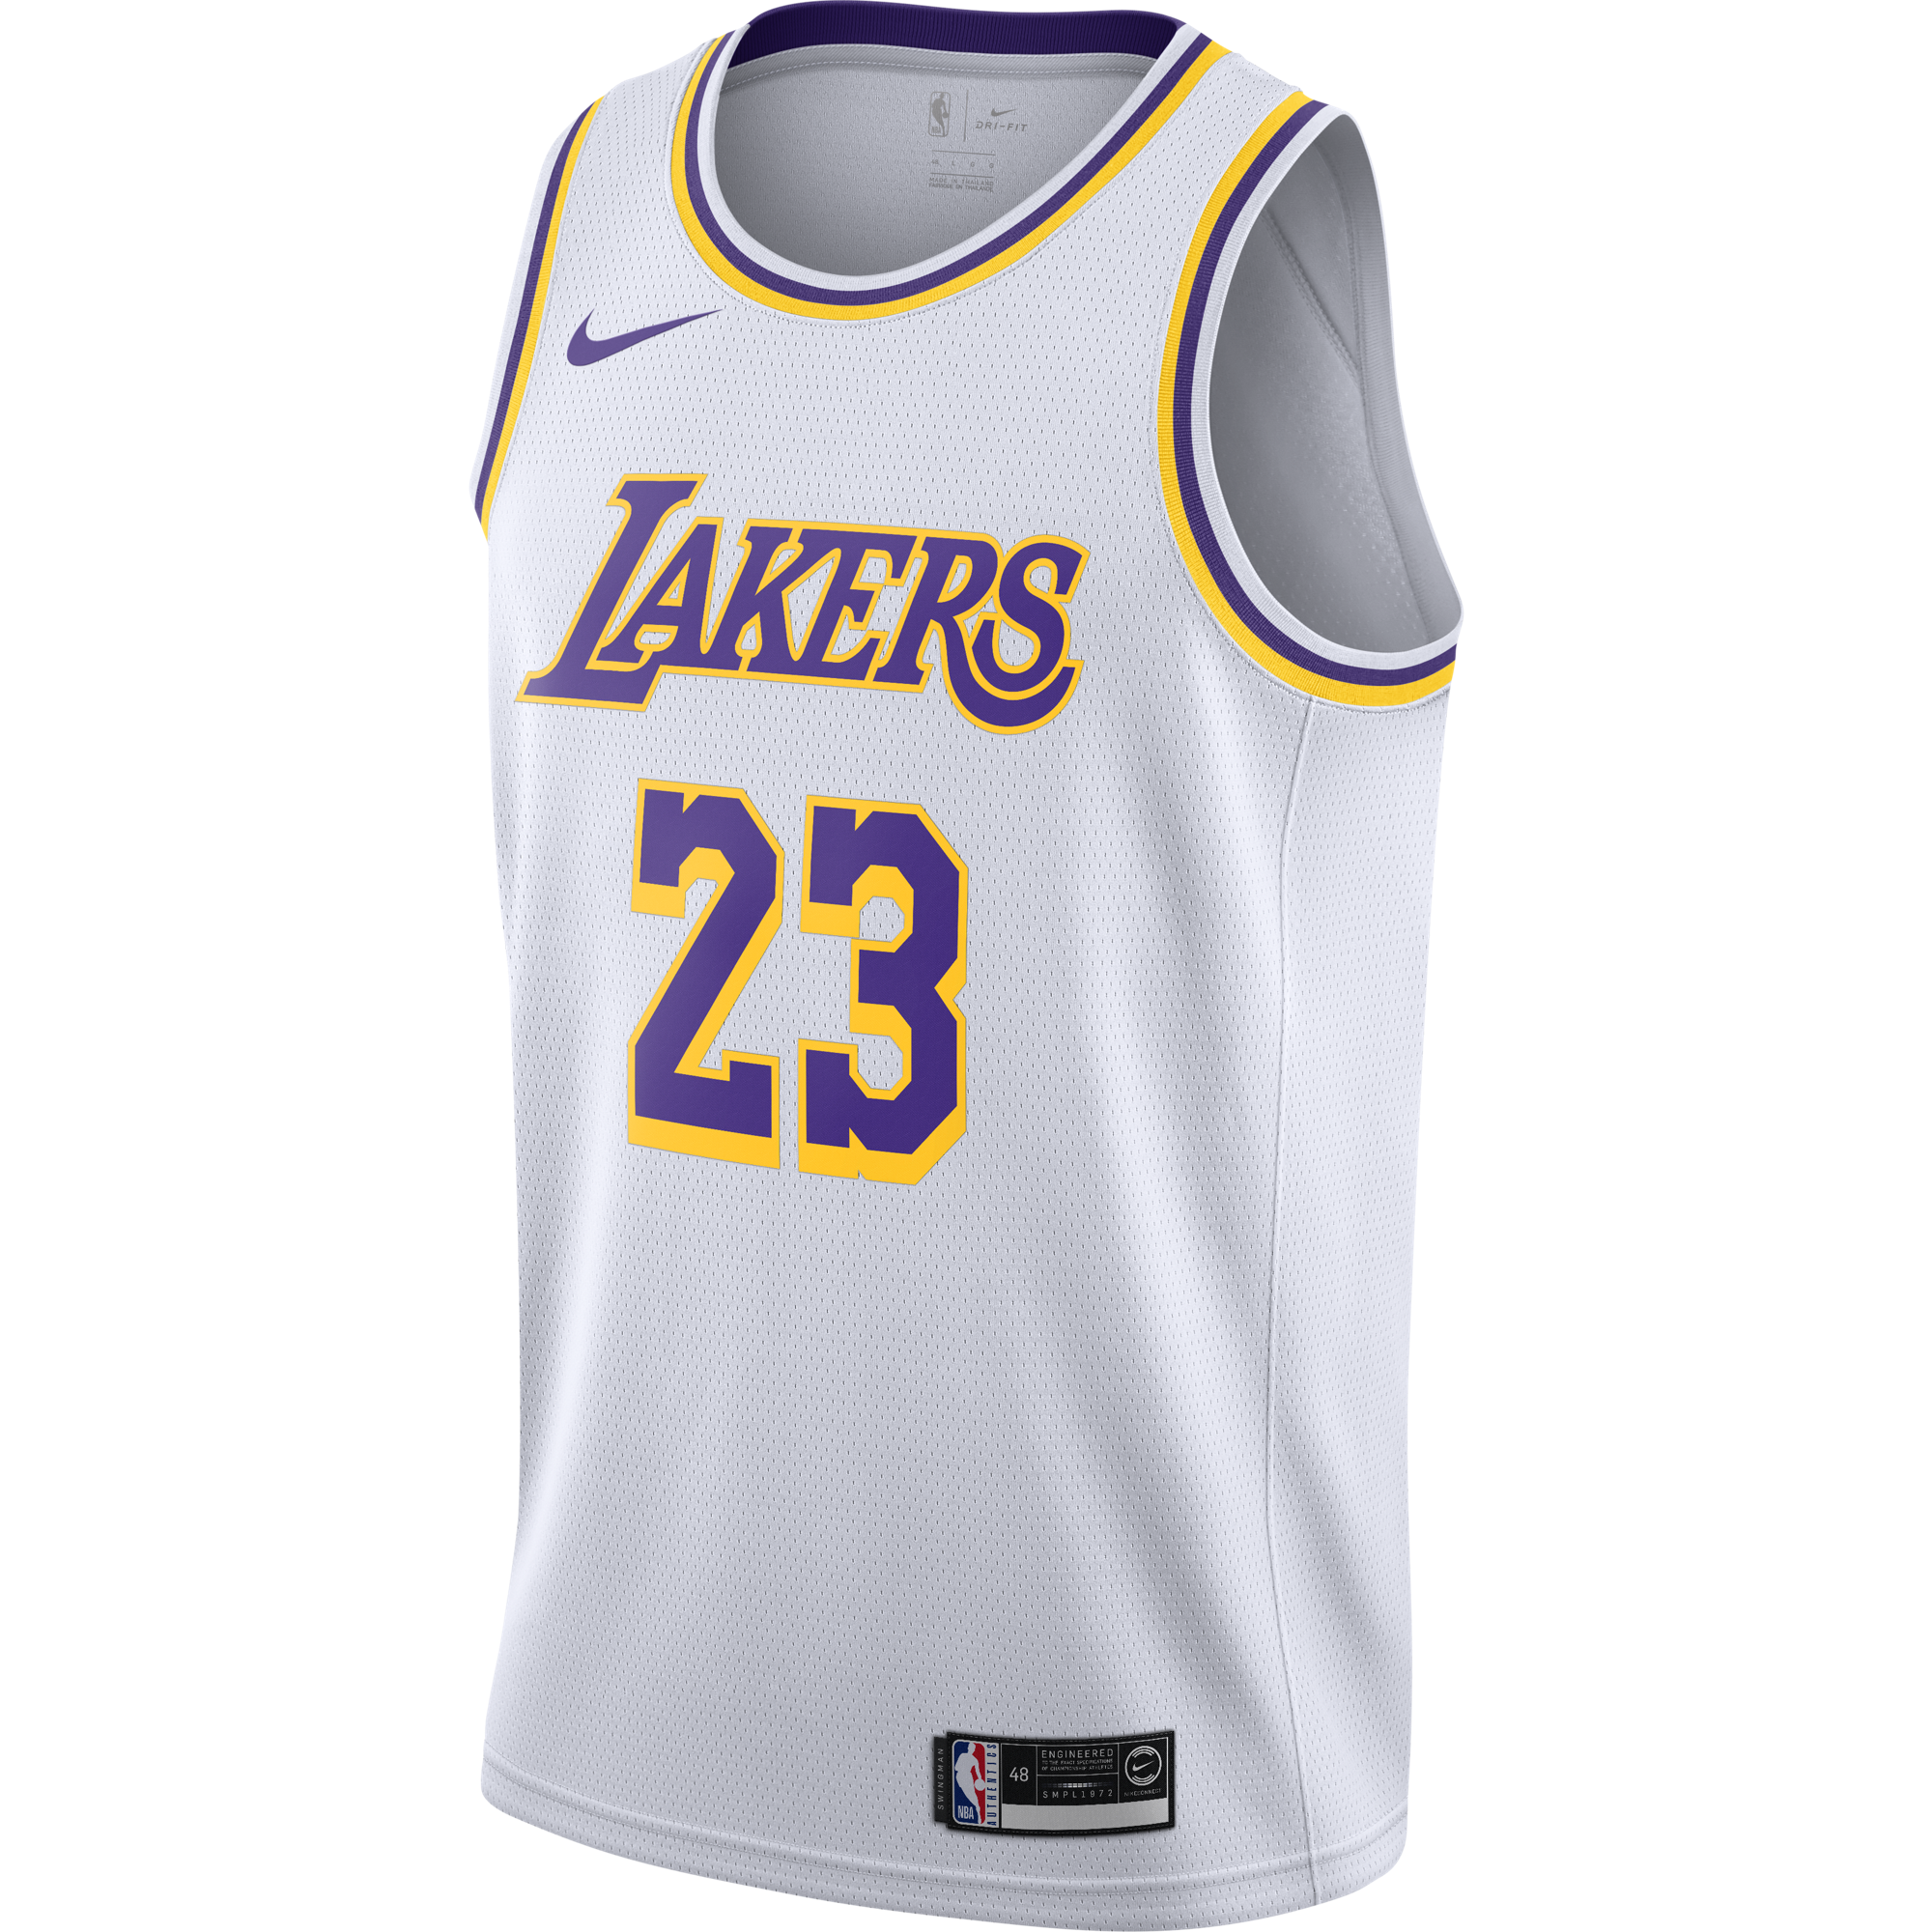 lakers 1 jersey